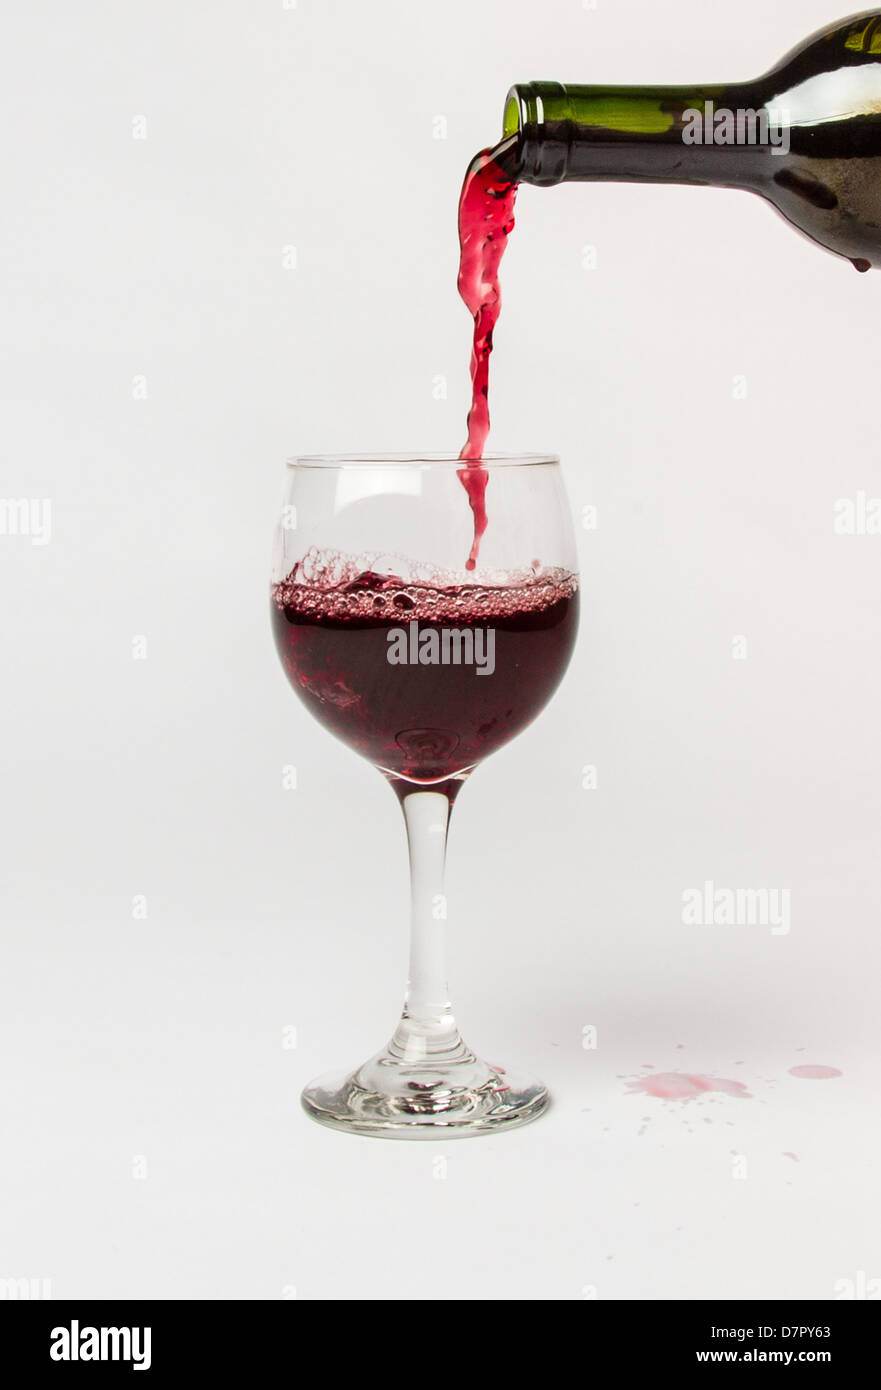 Red Wine pouring out of a bottle into a glass and splattering the white background. Stock Photo